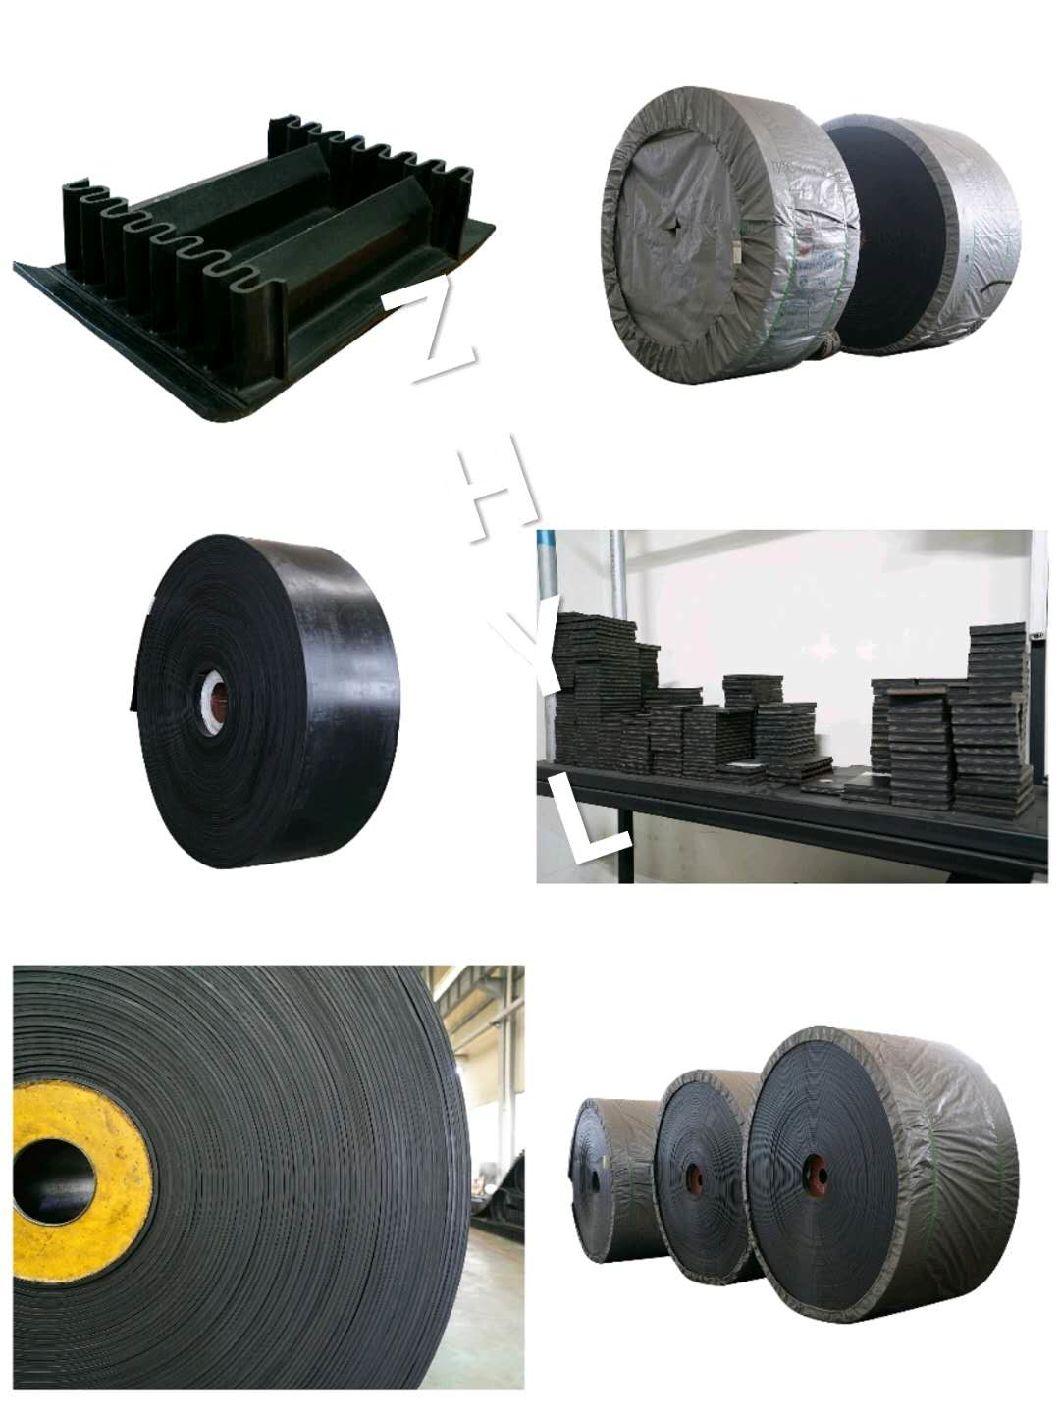 Steel Reiforced Conveyor Belting with Best Carcass Layer for Power Industry